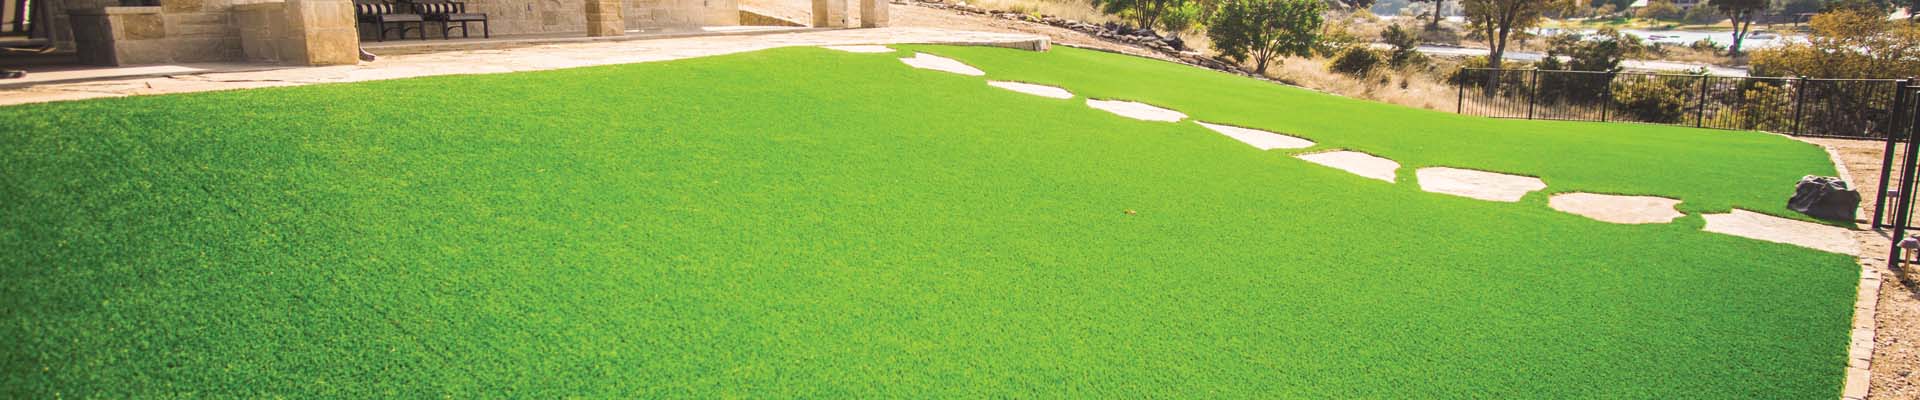 lawn and landscape that use artificial grass. lawn and landscape in your backyard surrounded by artificial grass.